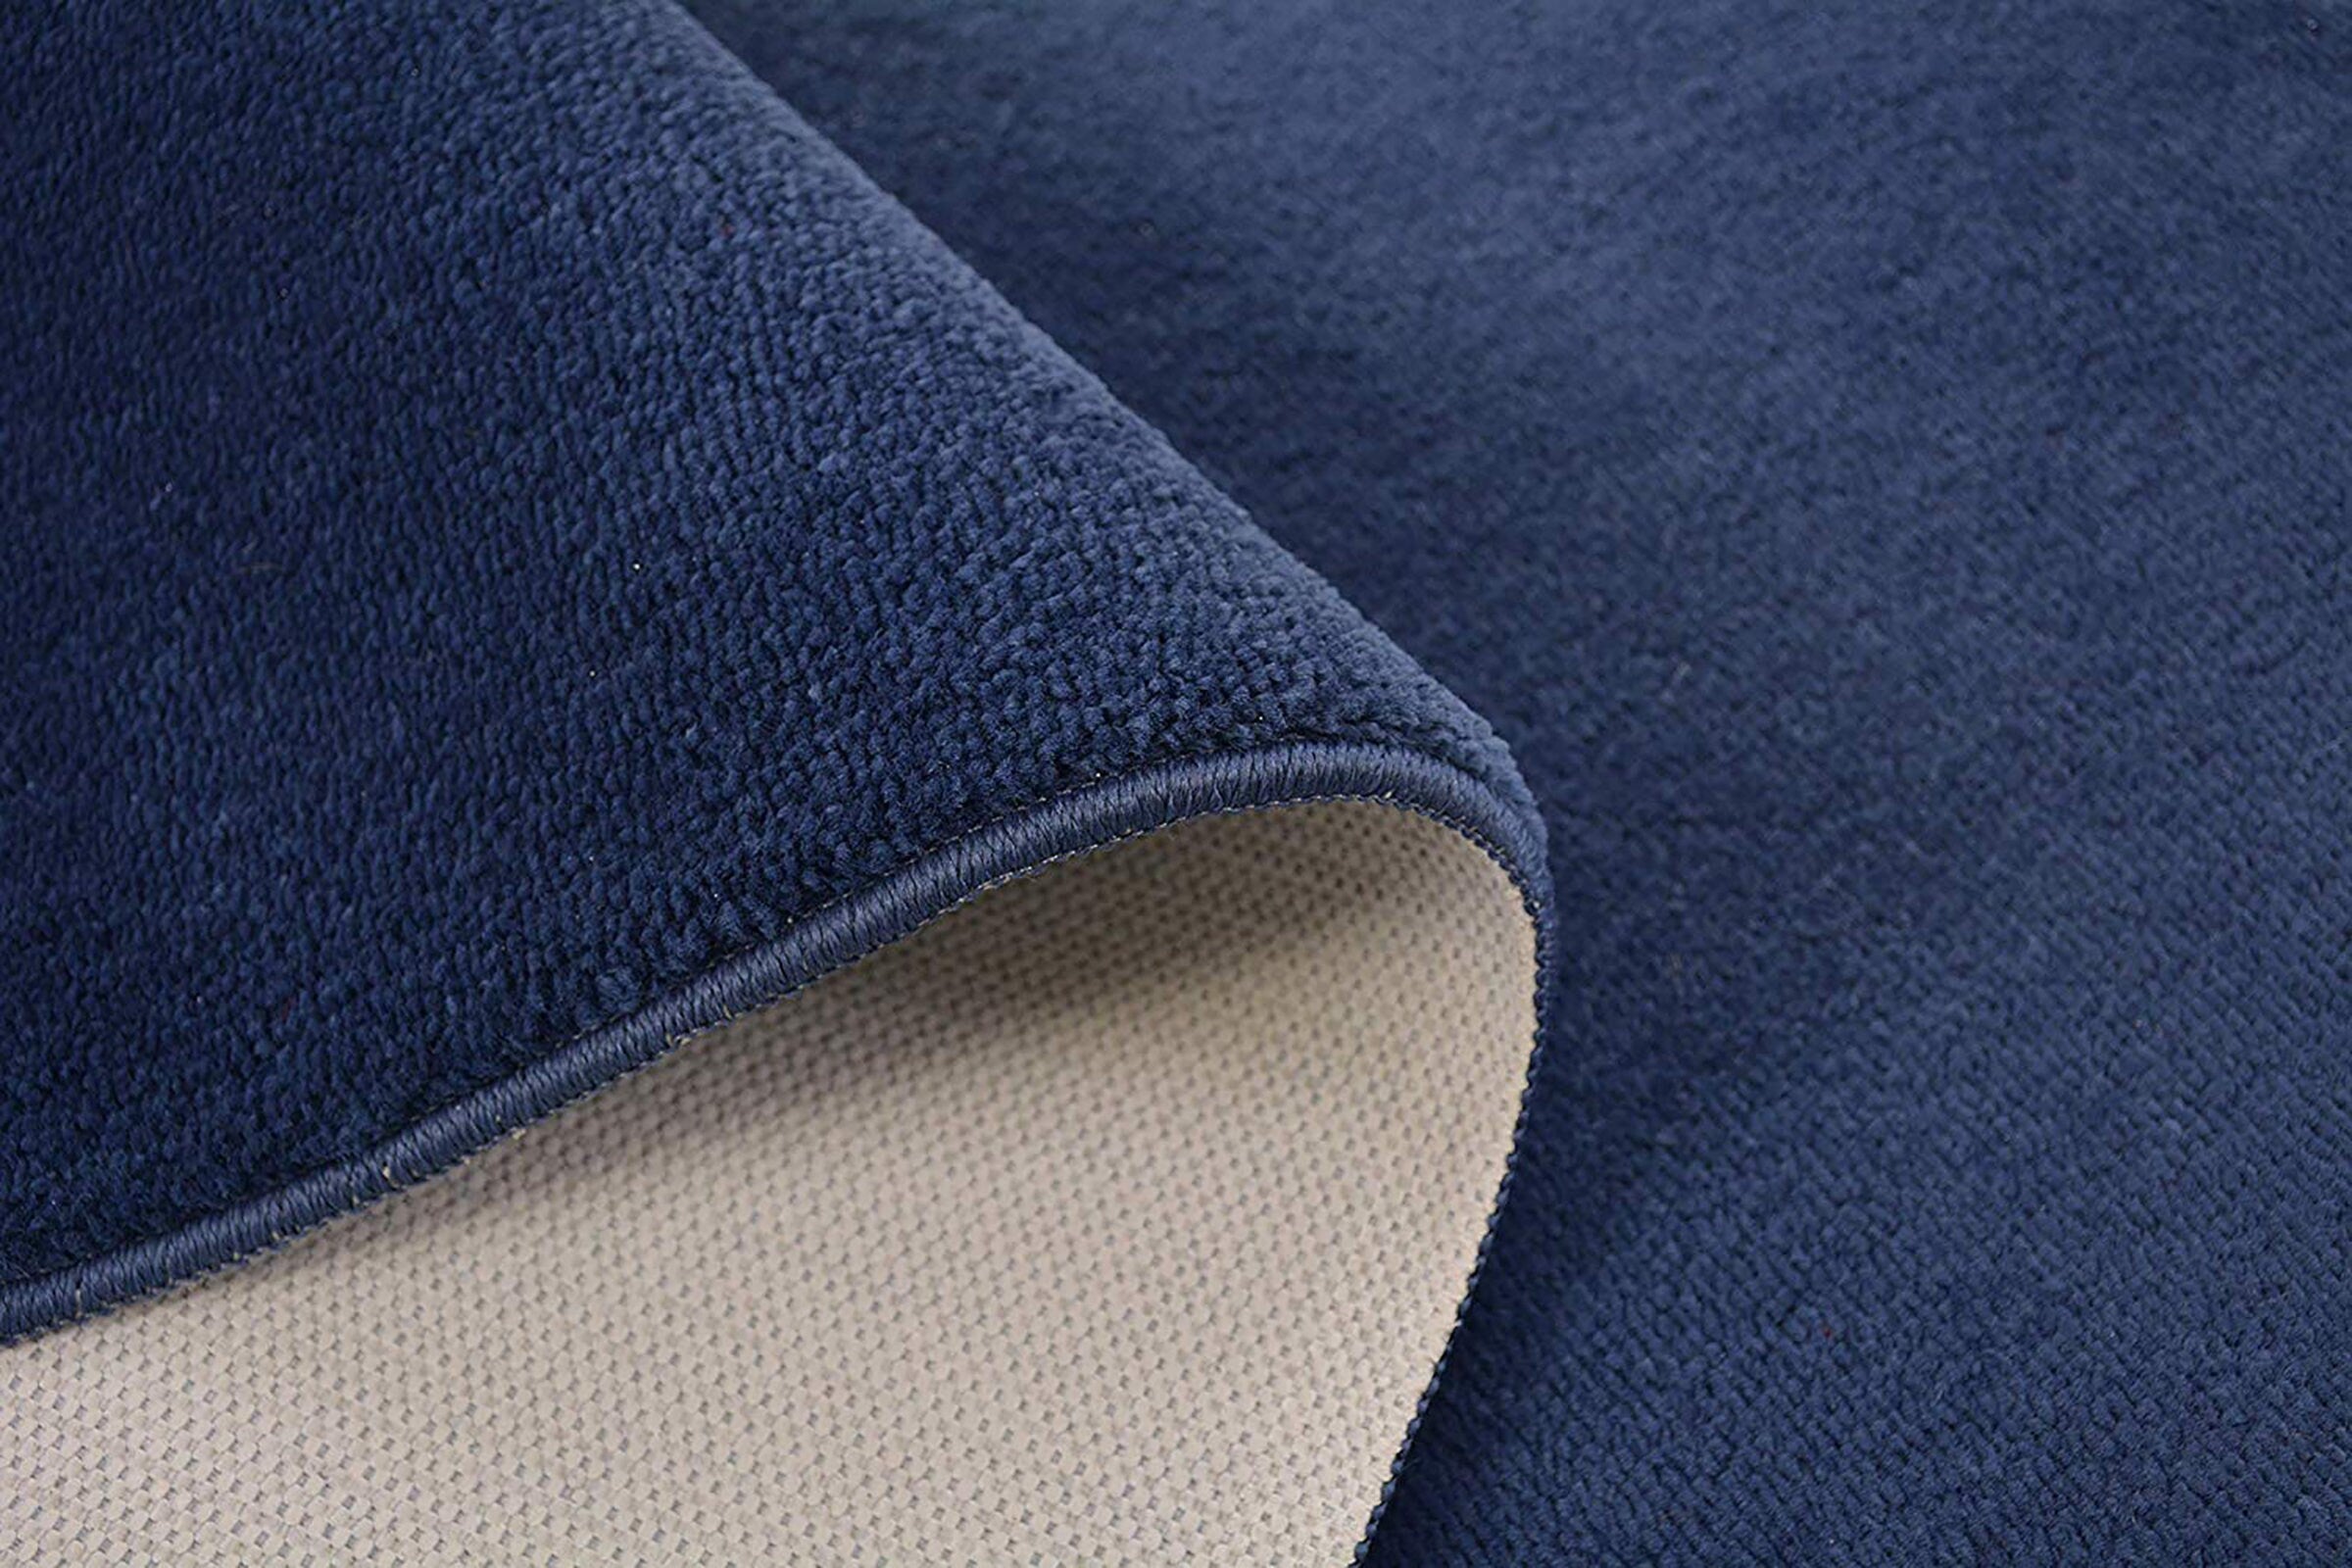 Machine Washable Custom Size Runner Rug Solid Navy Blue Color Skid Resistant Rug Runner Customize Up to 50 Feet and 30 Inch Width Runner Rug